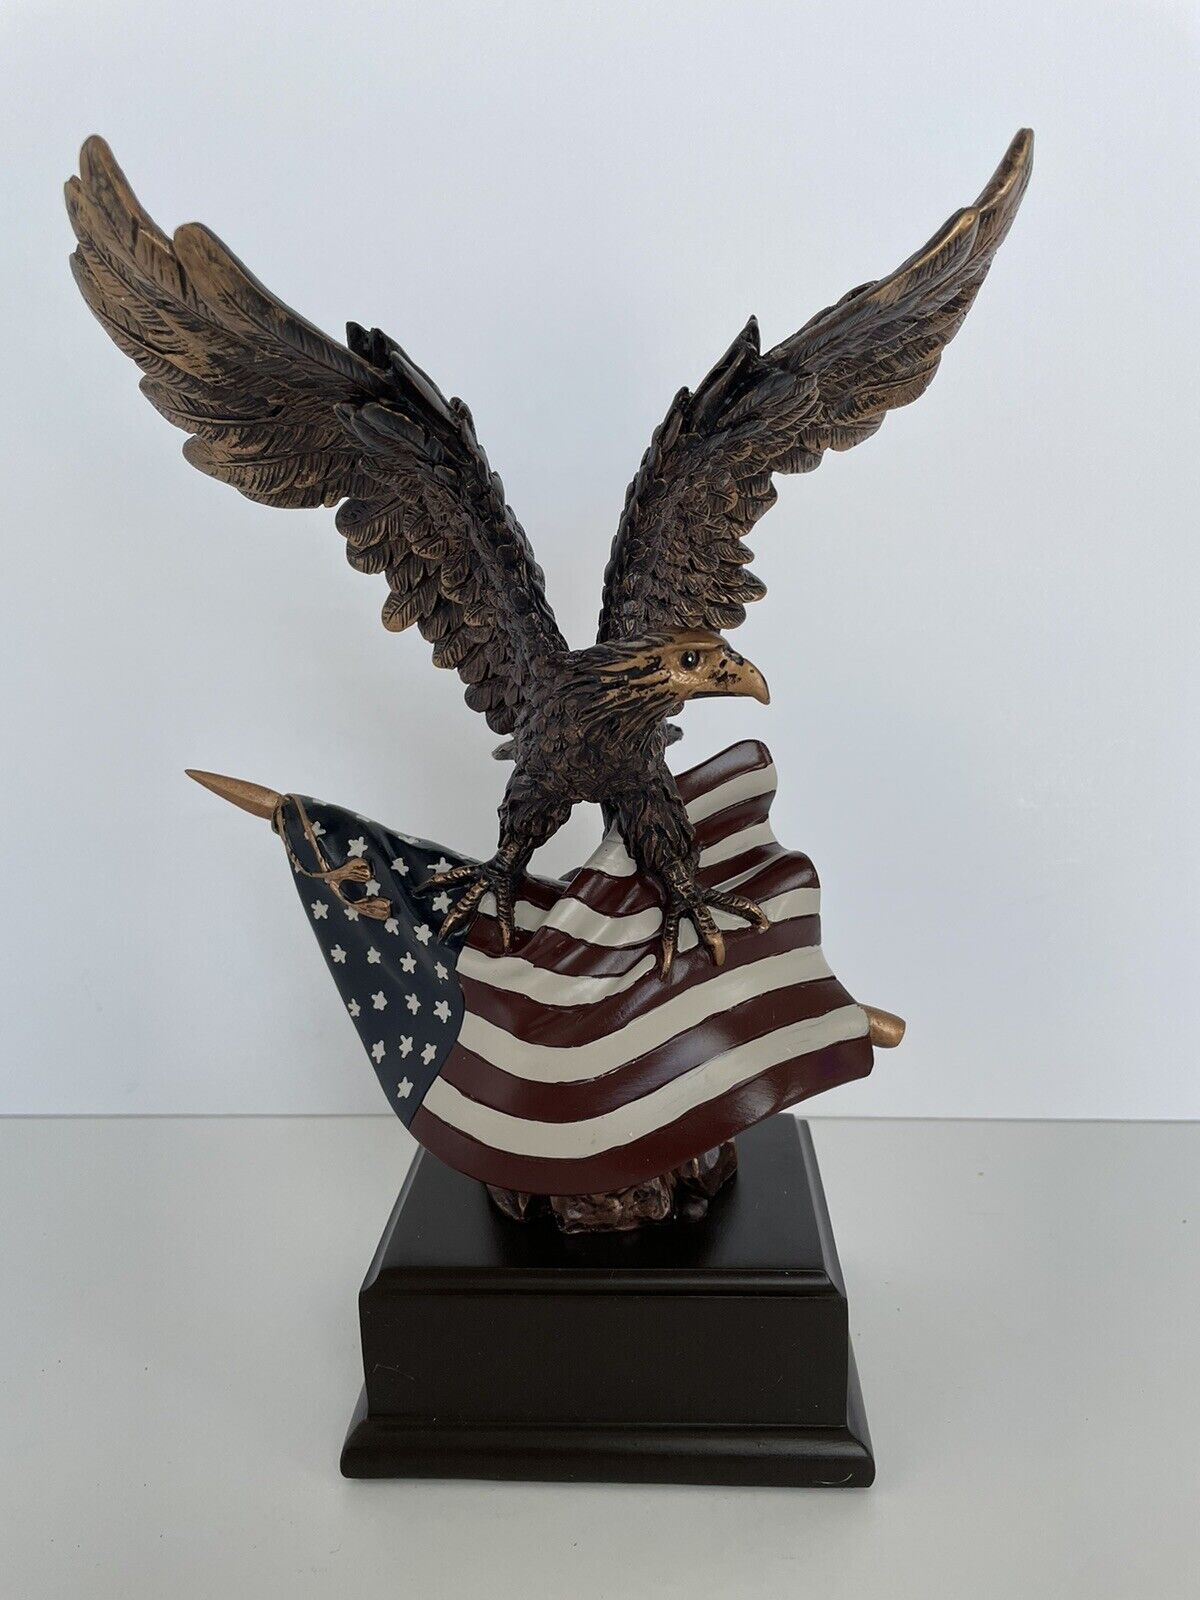 NRA Marian Imports F51155 Eagle With Flag Bronze Plated Resin Sculpture 11”